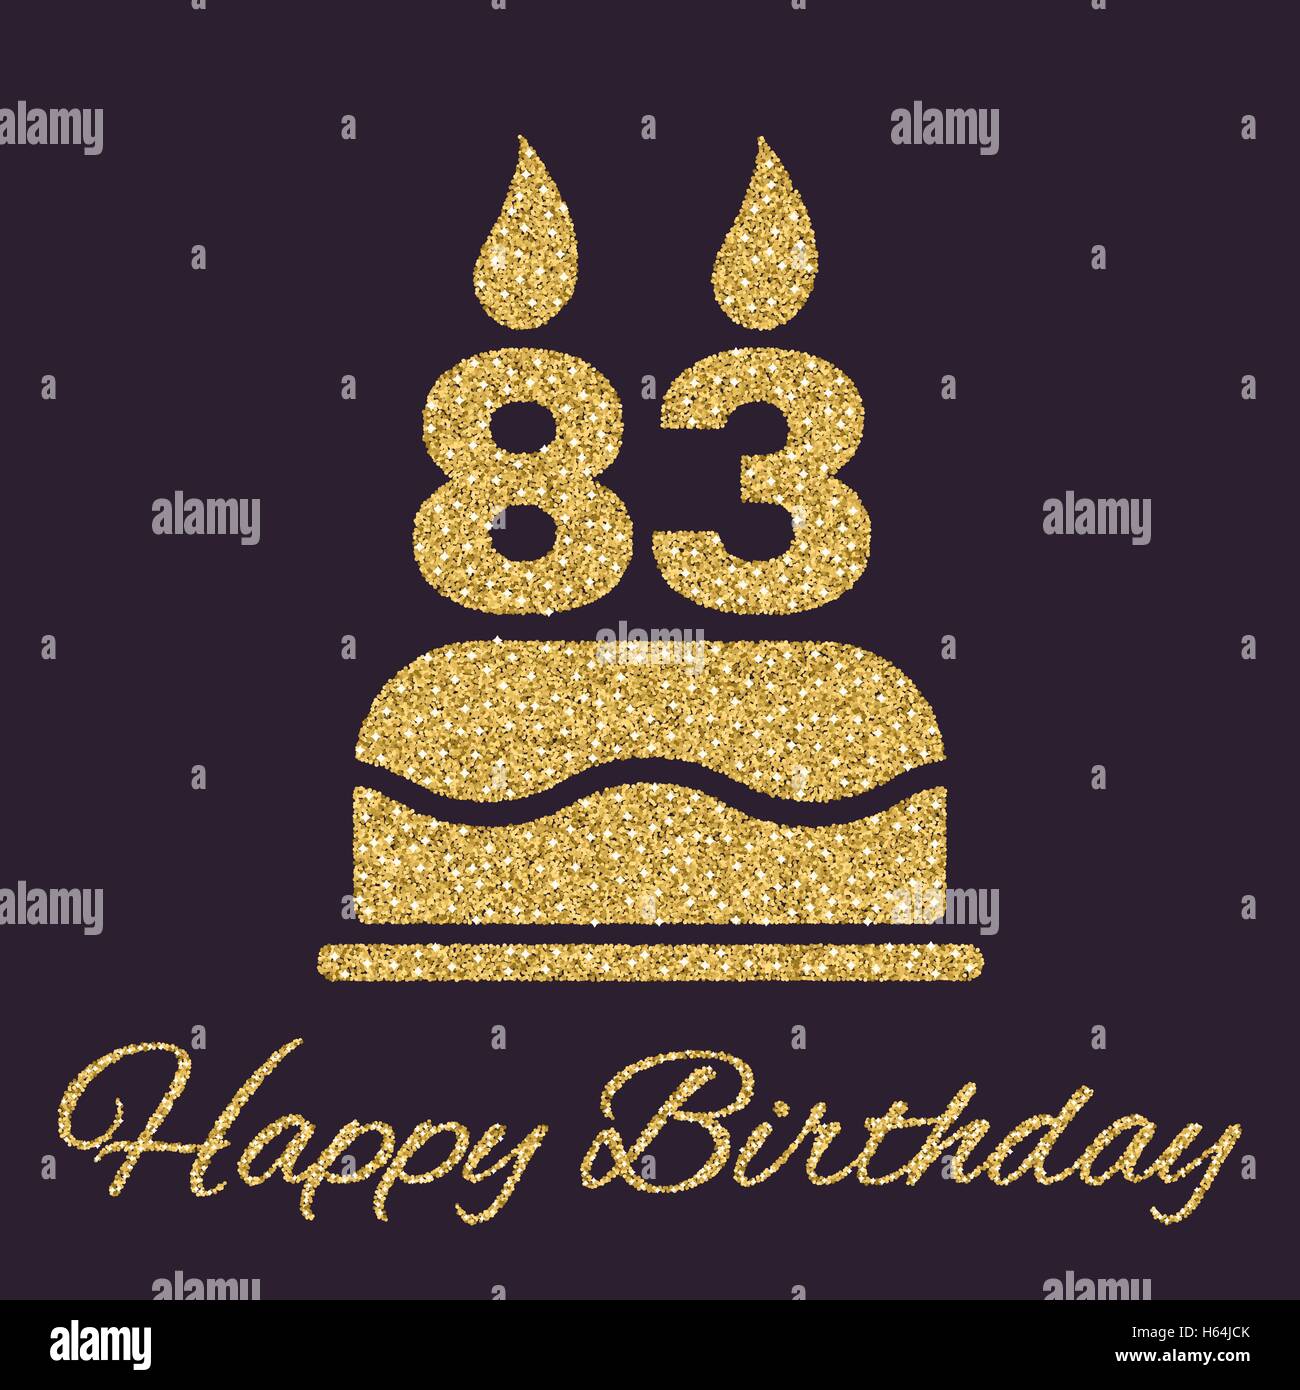 The birthday cake with candles in the form of number 83 icon. Birthday symbol. Gold sparkles and glitter Stock Vector